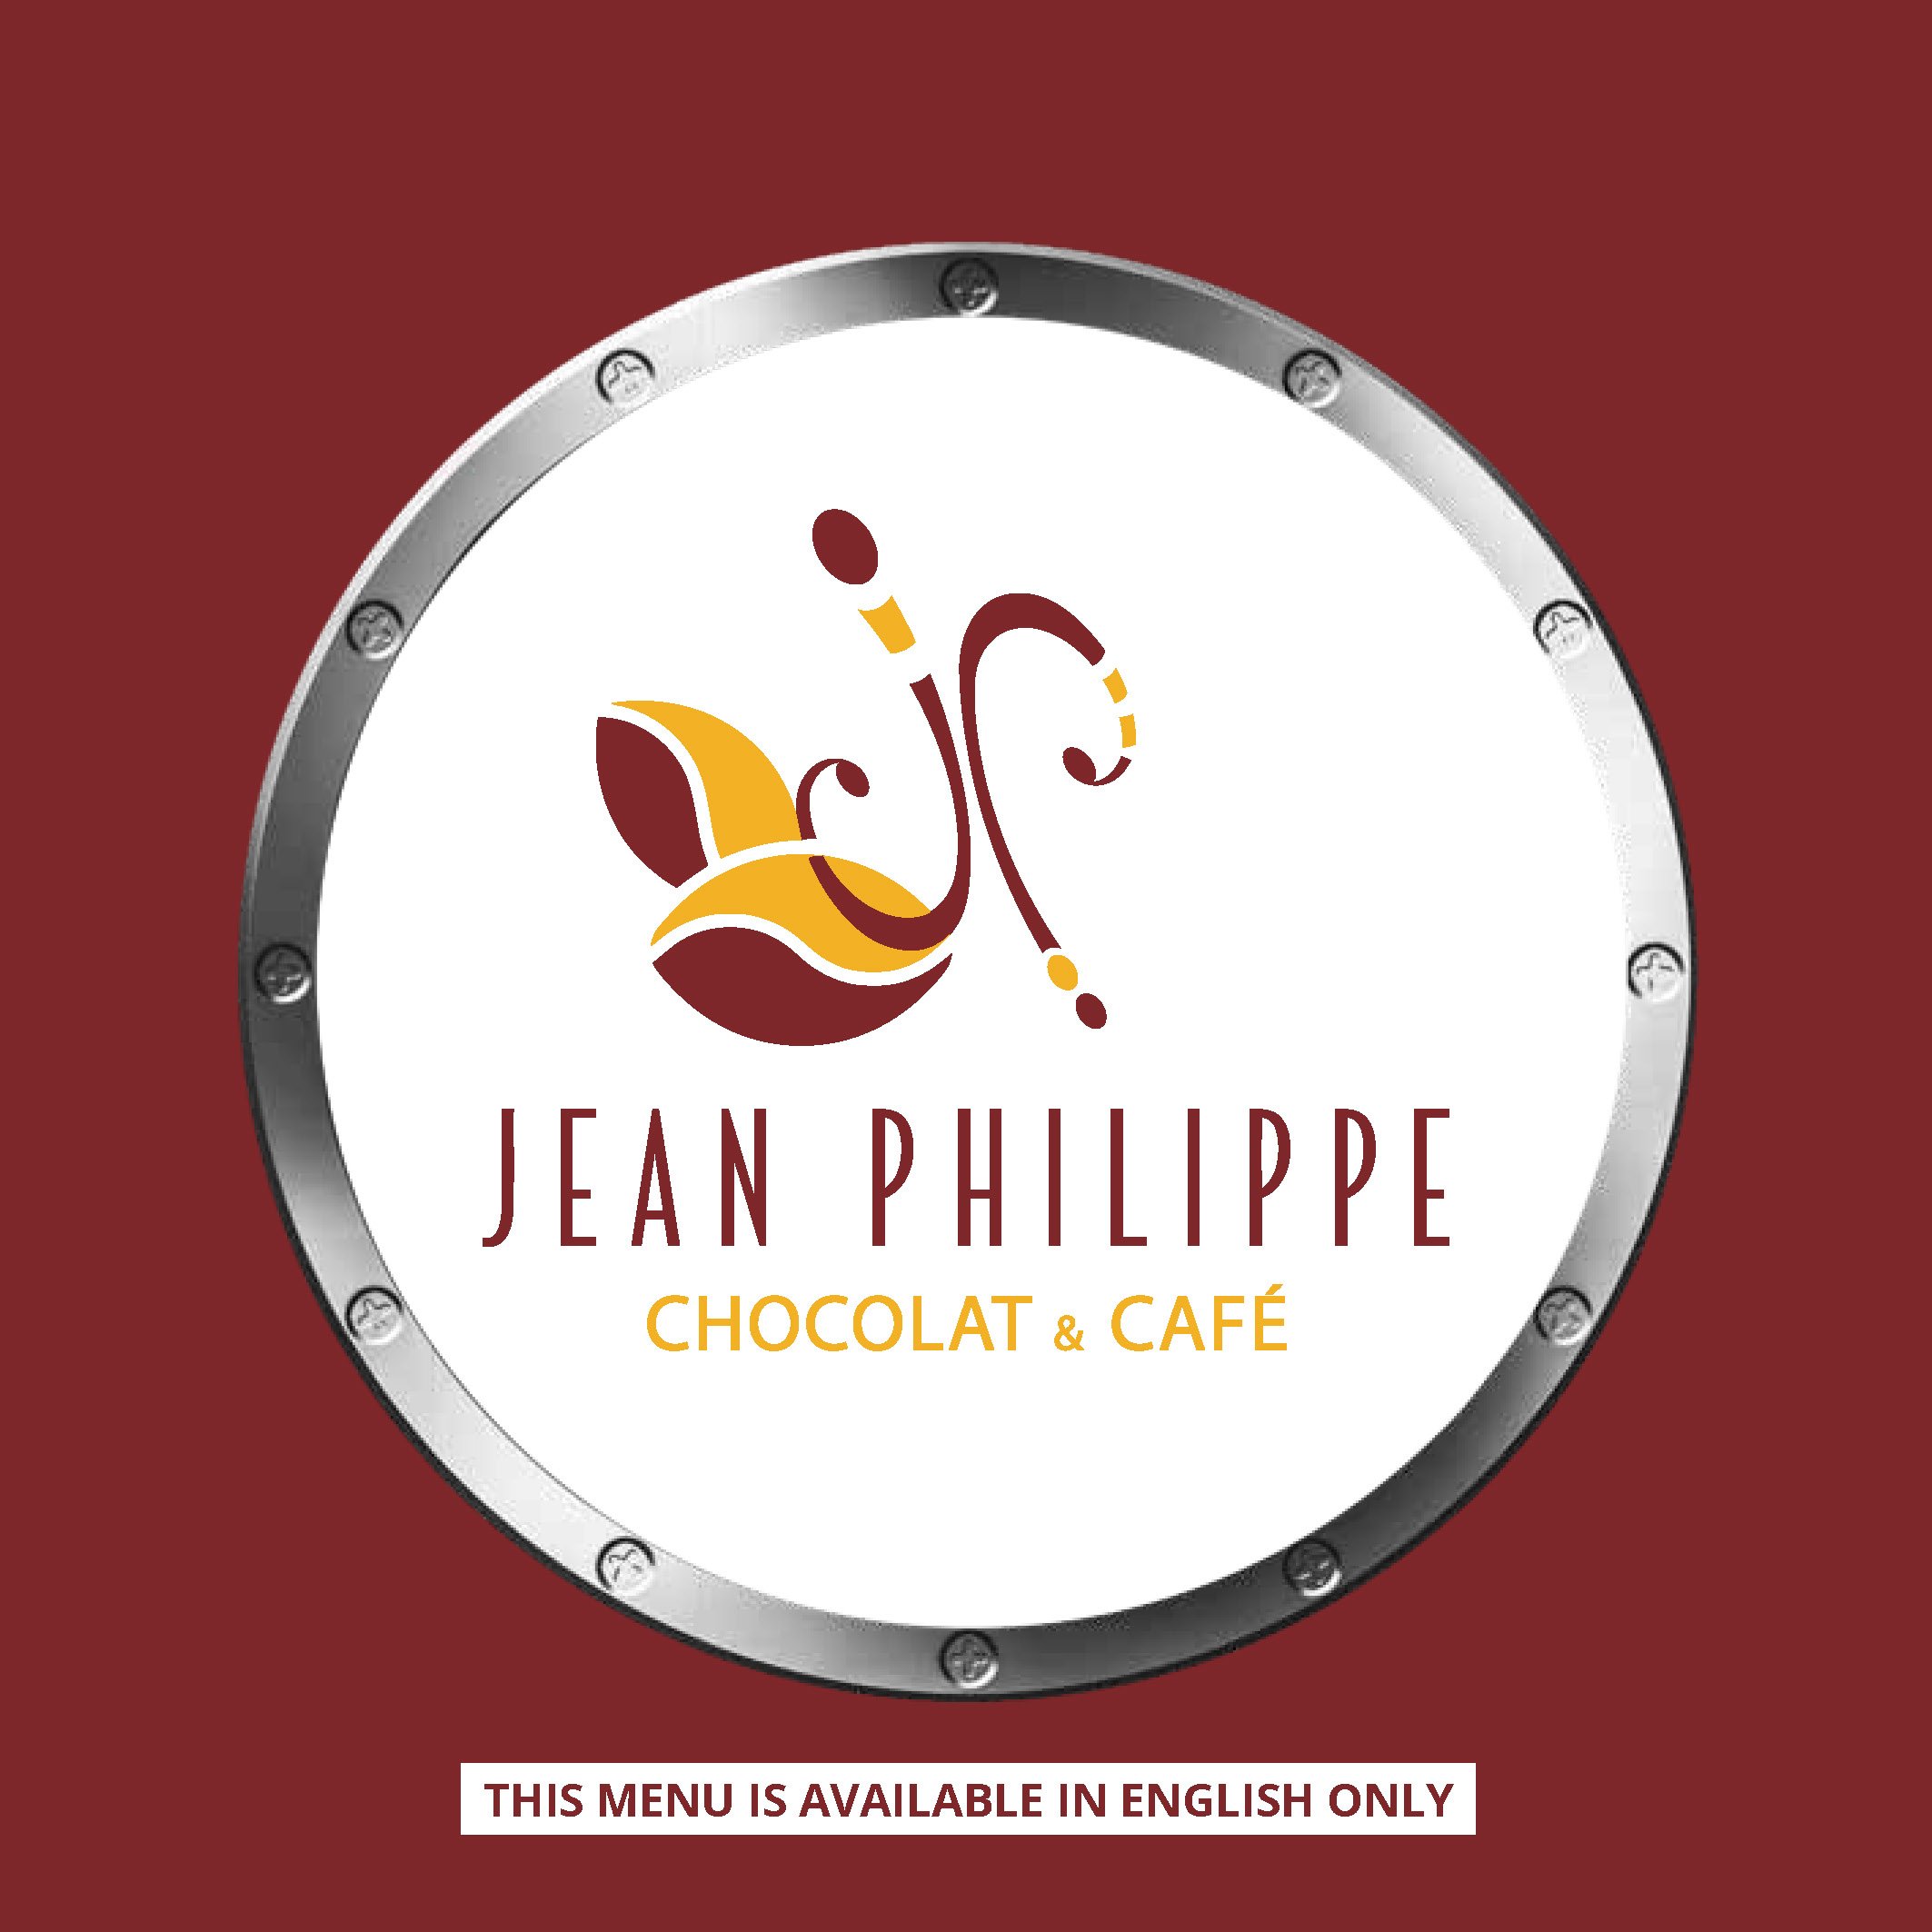 Jean Philippe Chocolat & Cafe_Page_01.jpg